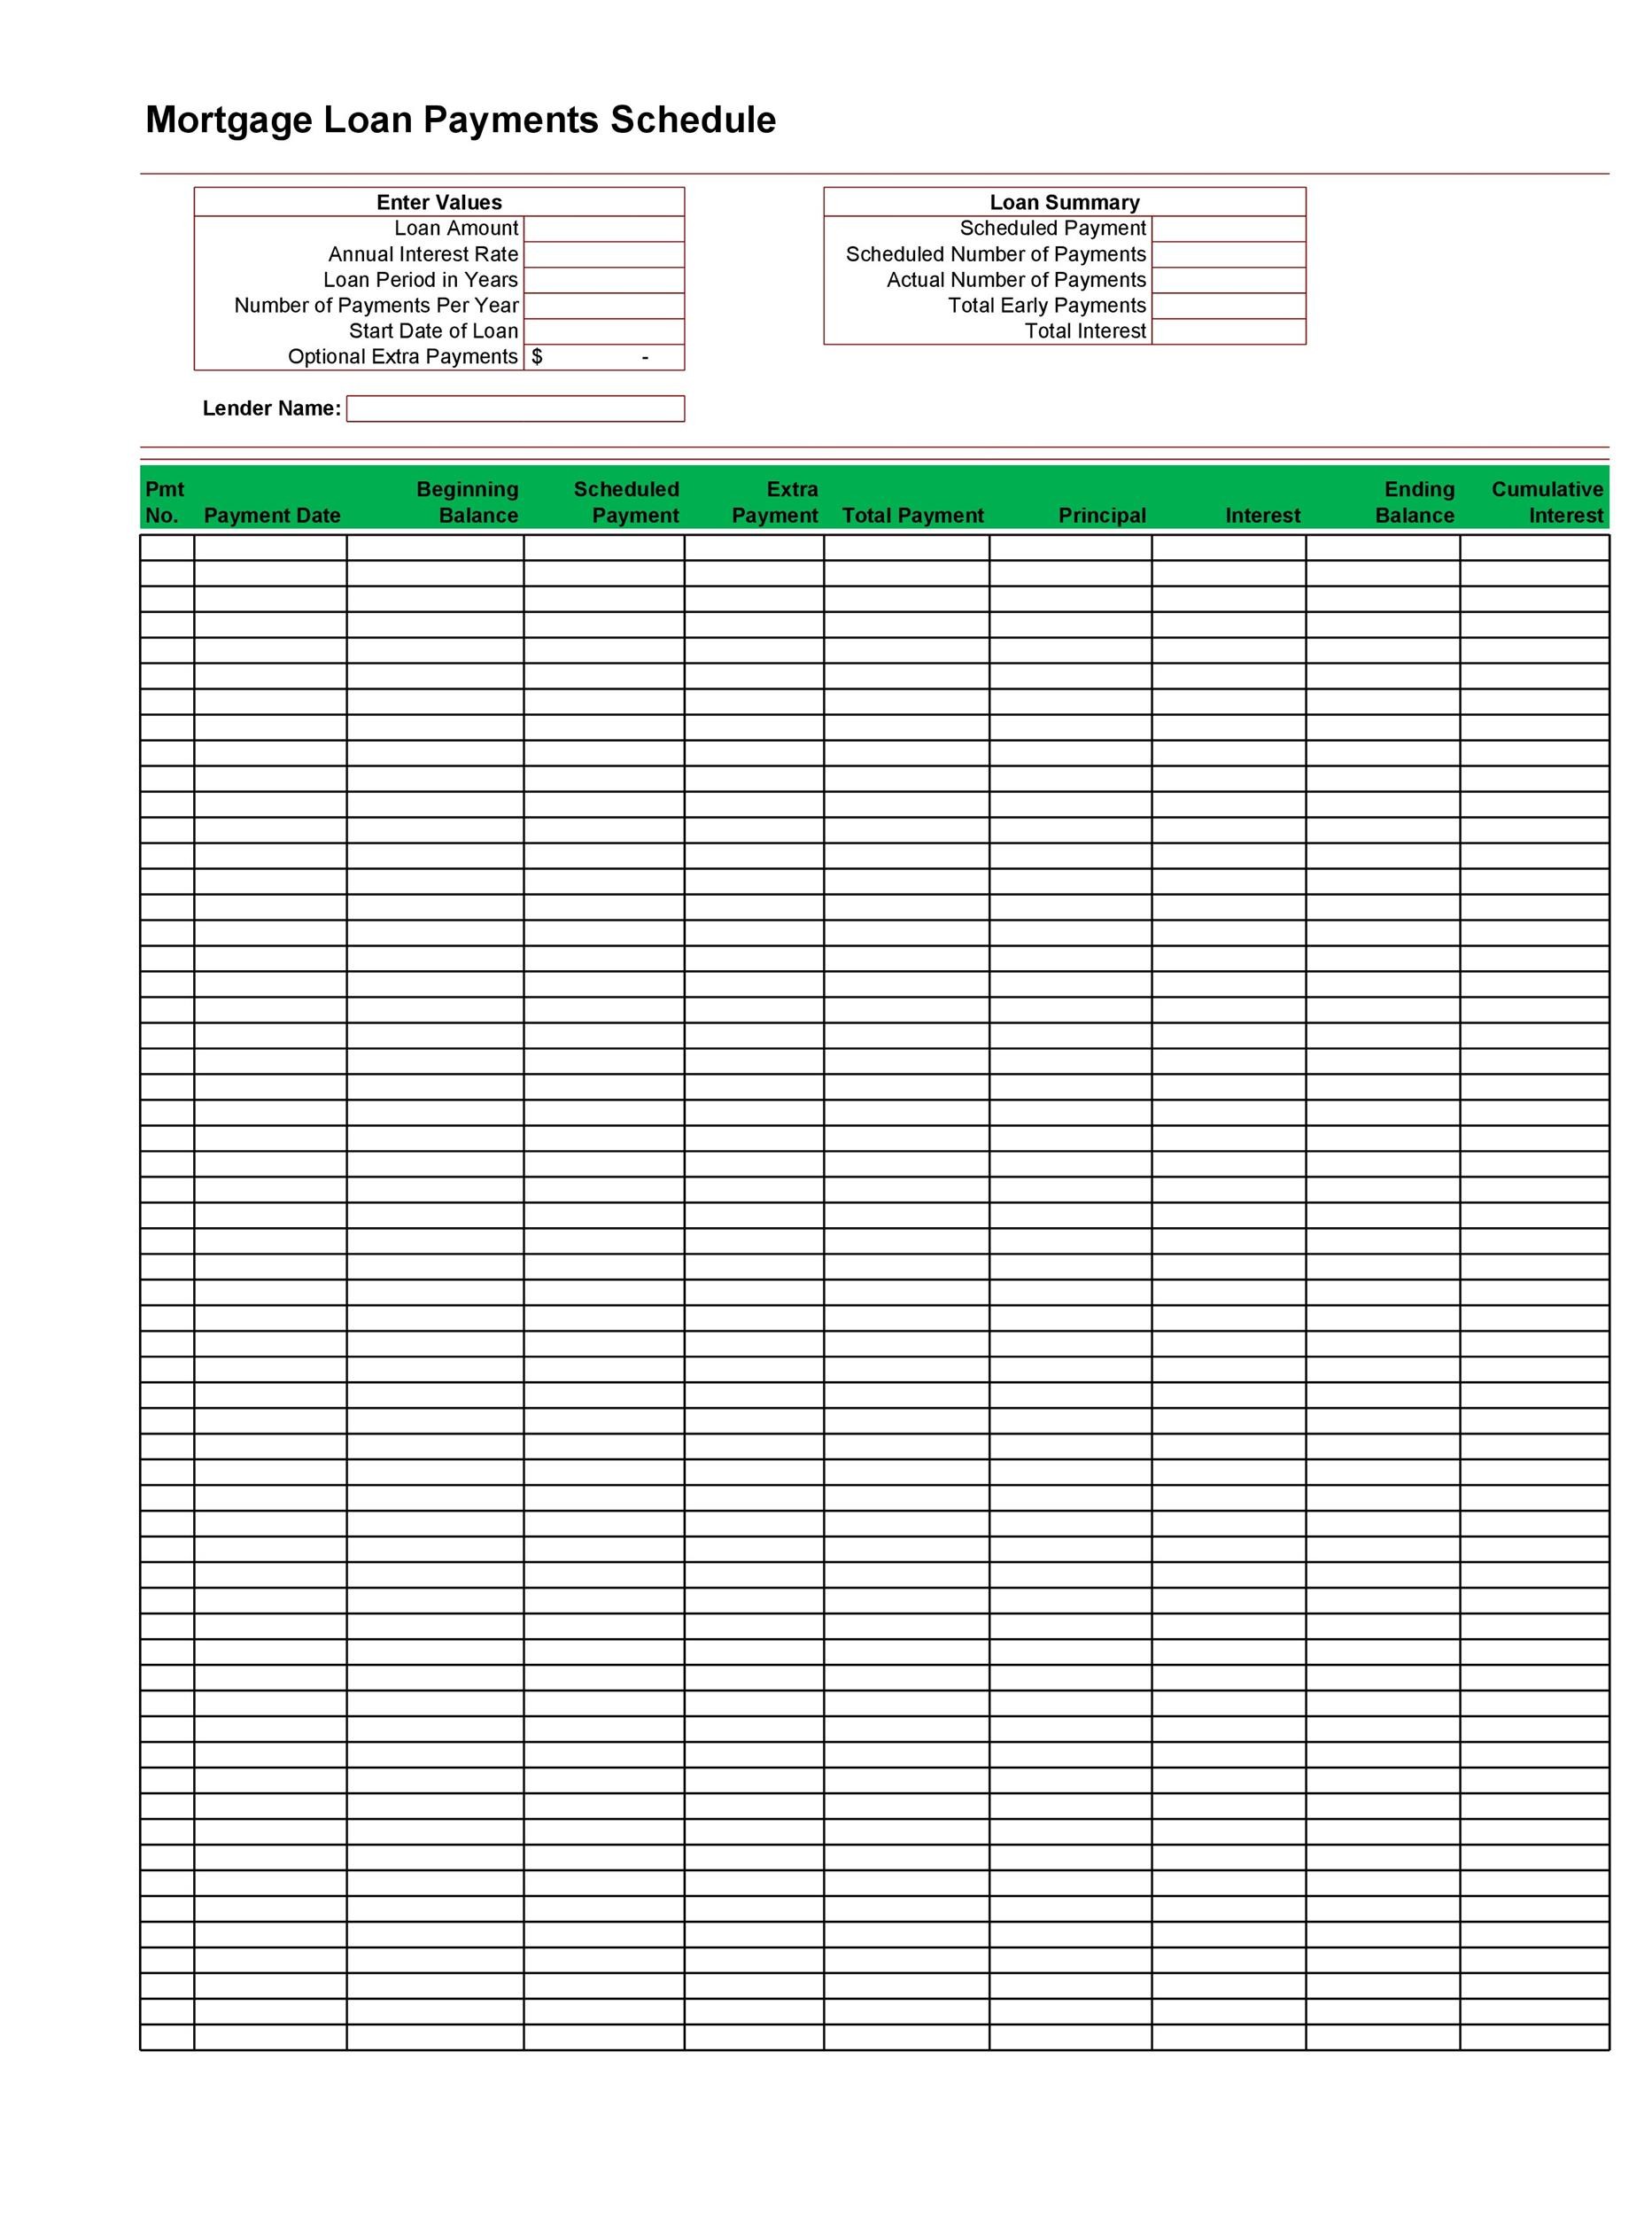 mortgage-payment-excel-template-excel-templates